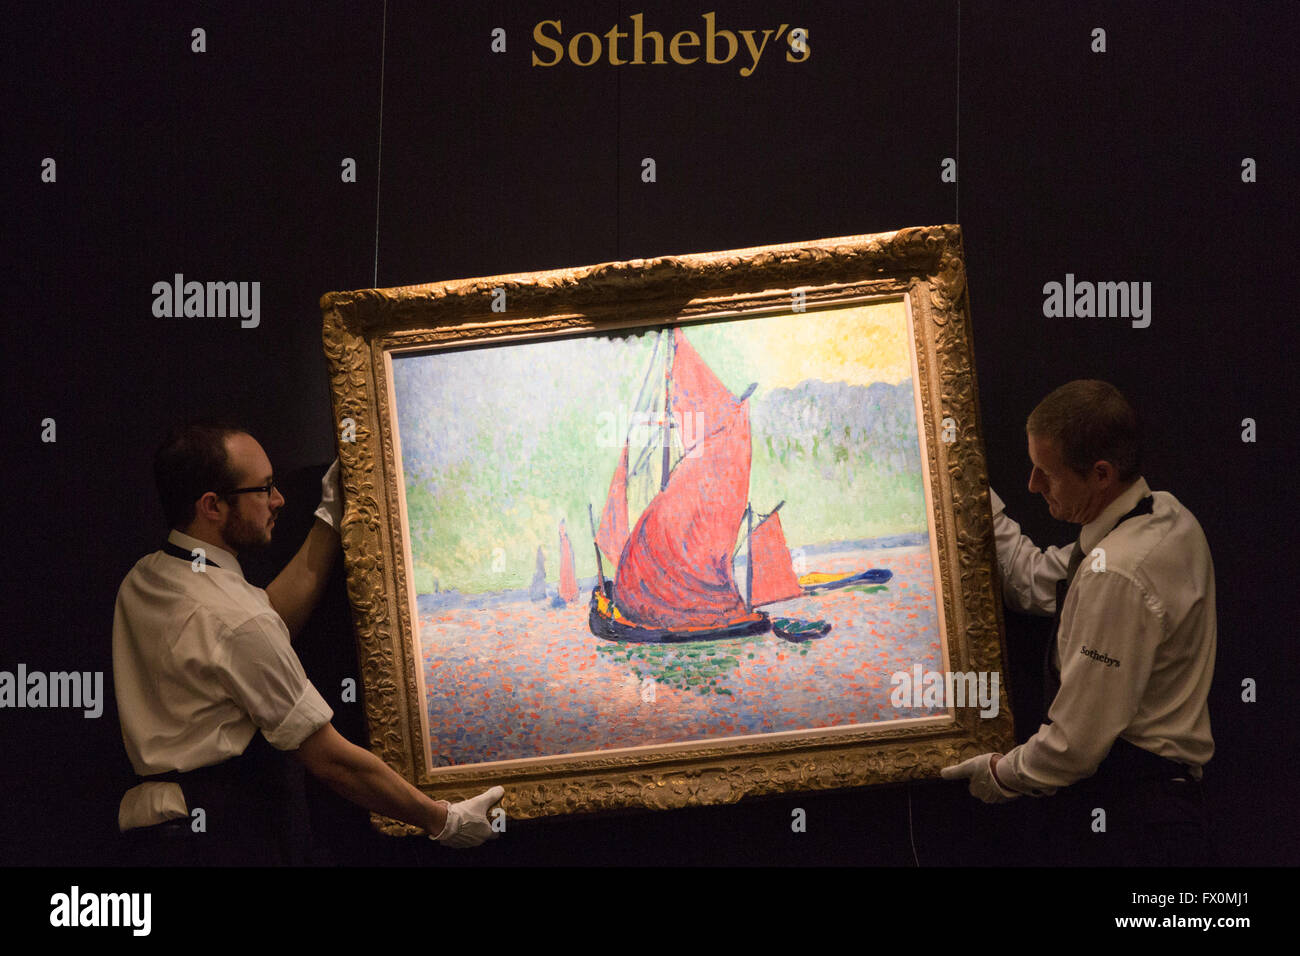 London, UK. 8 April 2016. Sotheby's employees handling the painting Les Voiles Rouges, 1906, by Andre Derain. Estimate USD 15-20 million. Sotheby's Auction Preview of Impressionist & Modern Art Evening Sale in London. The sale takes place in New York on 9 May 2016. Stock Photo